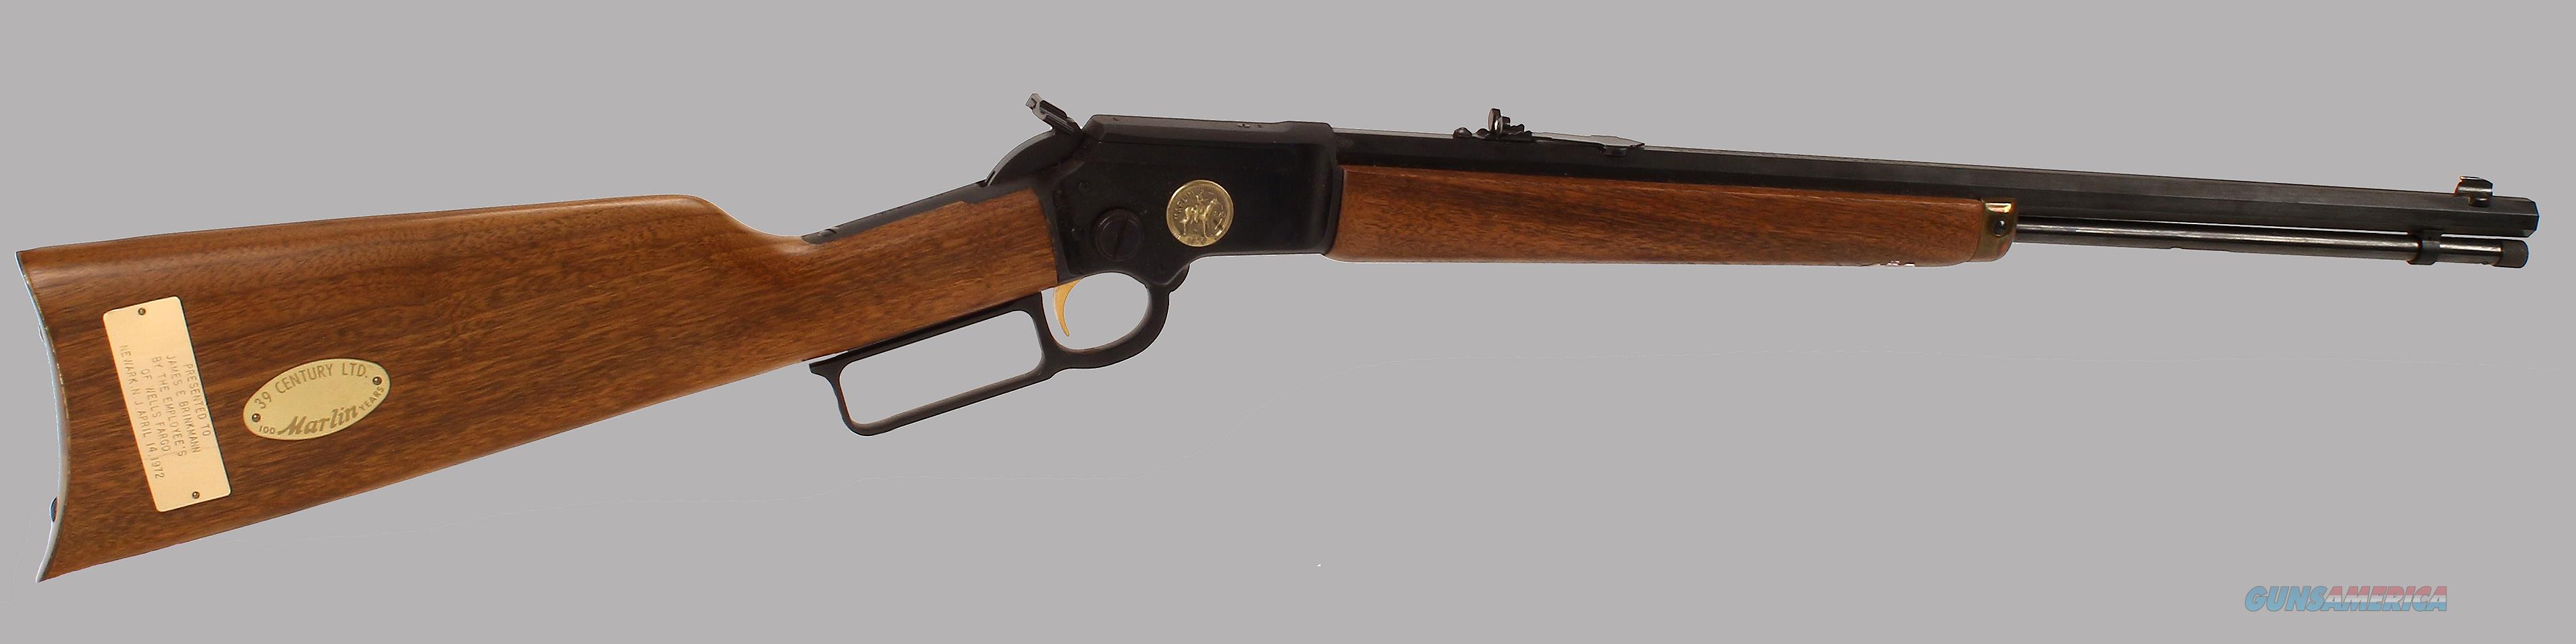 Marlin Lever Action 22lr Model 39a Rifle For Sale